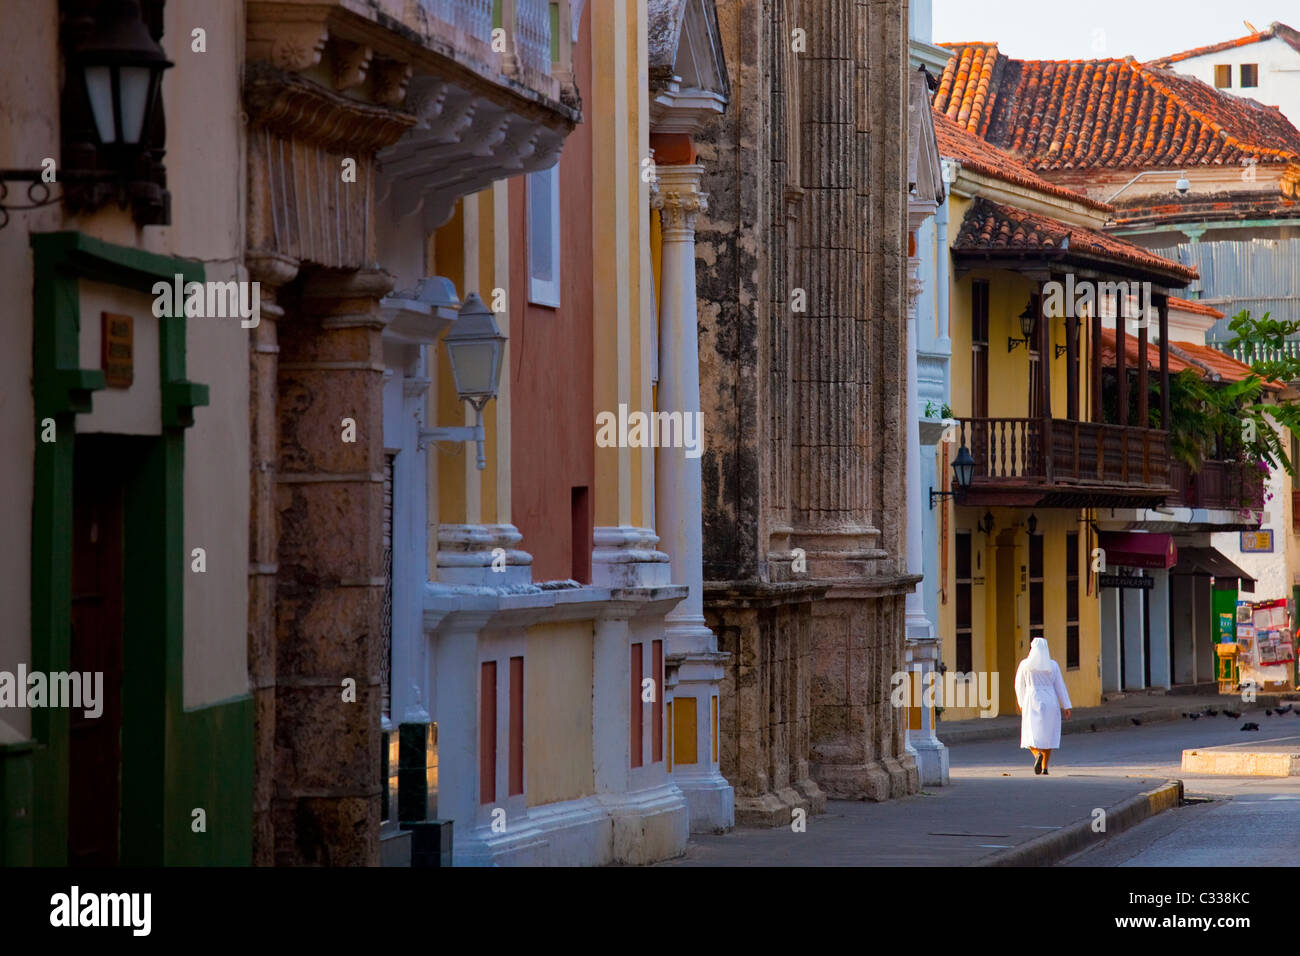 Catholic Nun in the narrow streets of the old city in Cartagena, Colombia Stock Photo